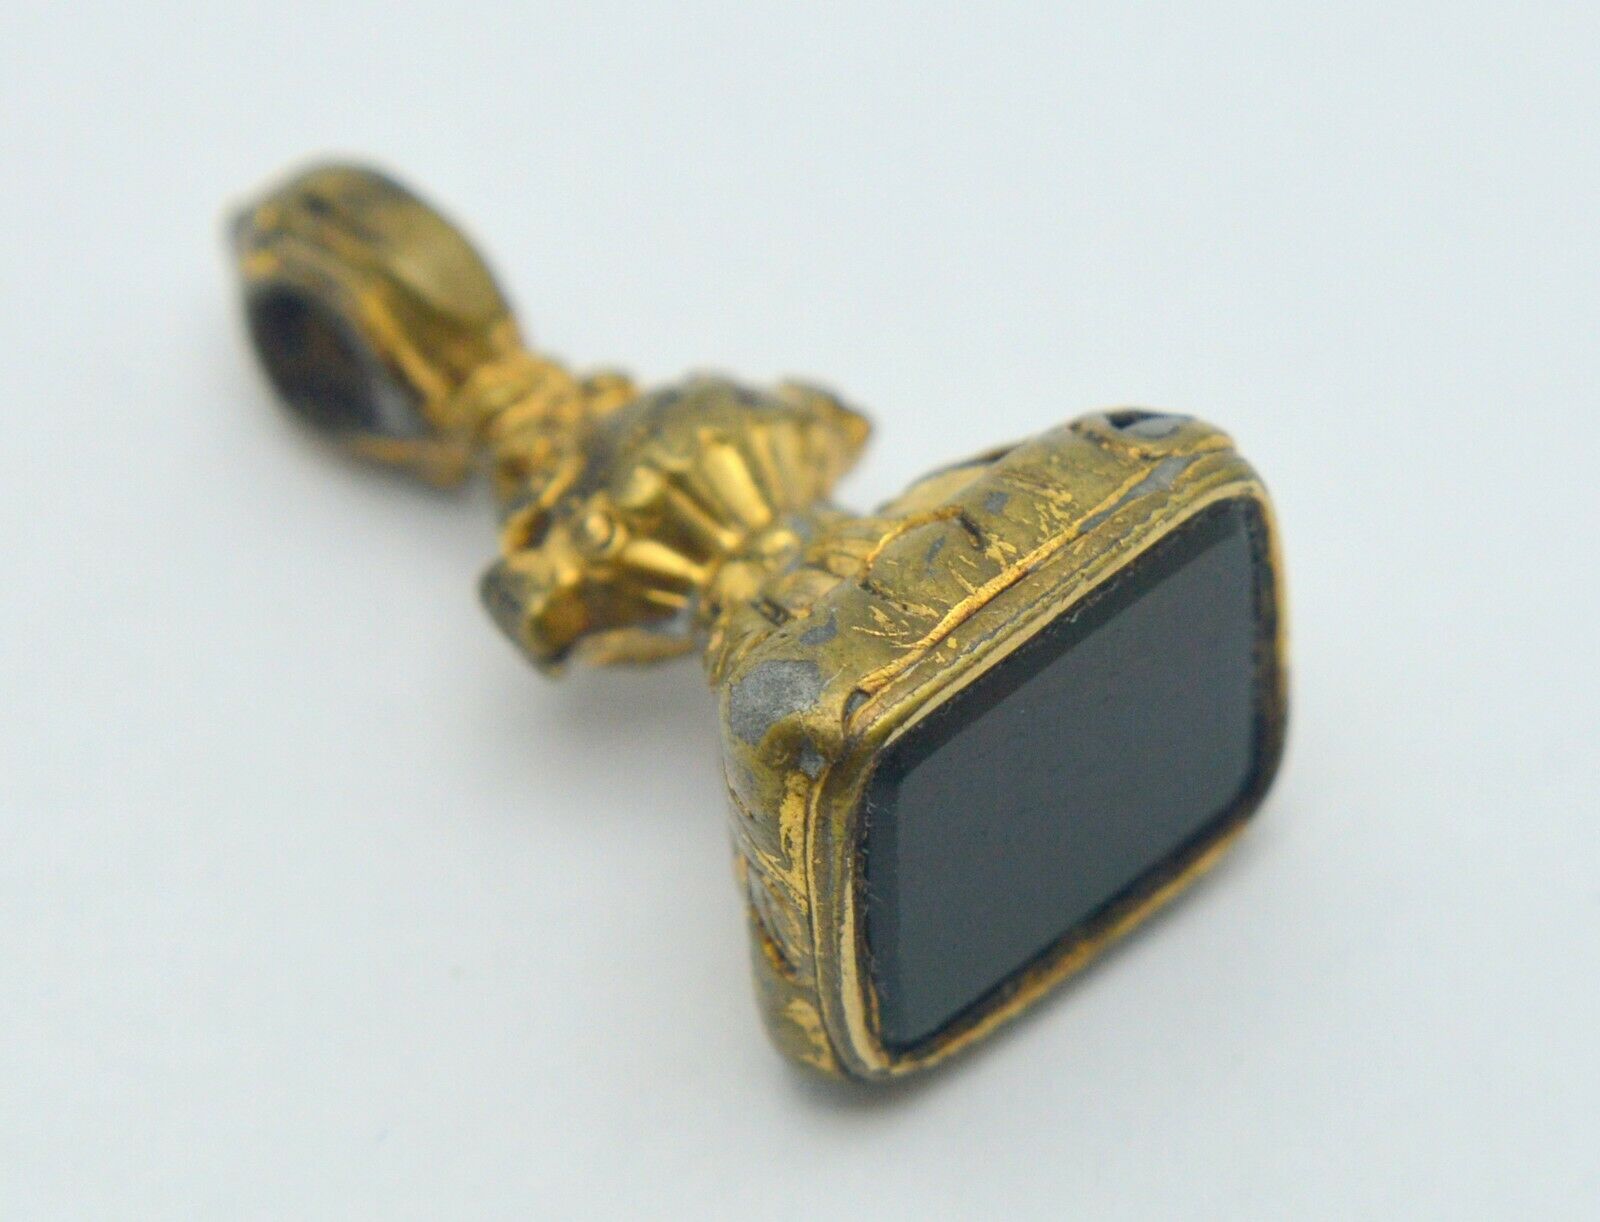 Antique Victorian Seal Stamp Watch Fob Dark Green Agate Stone Pendant Gold Cored